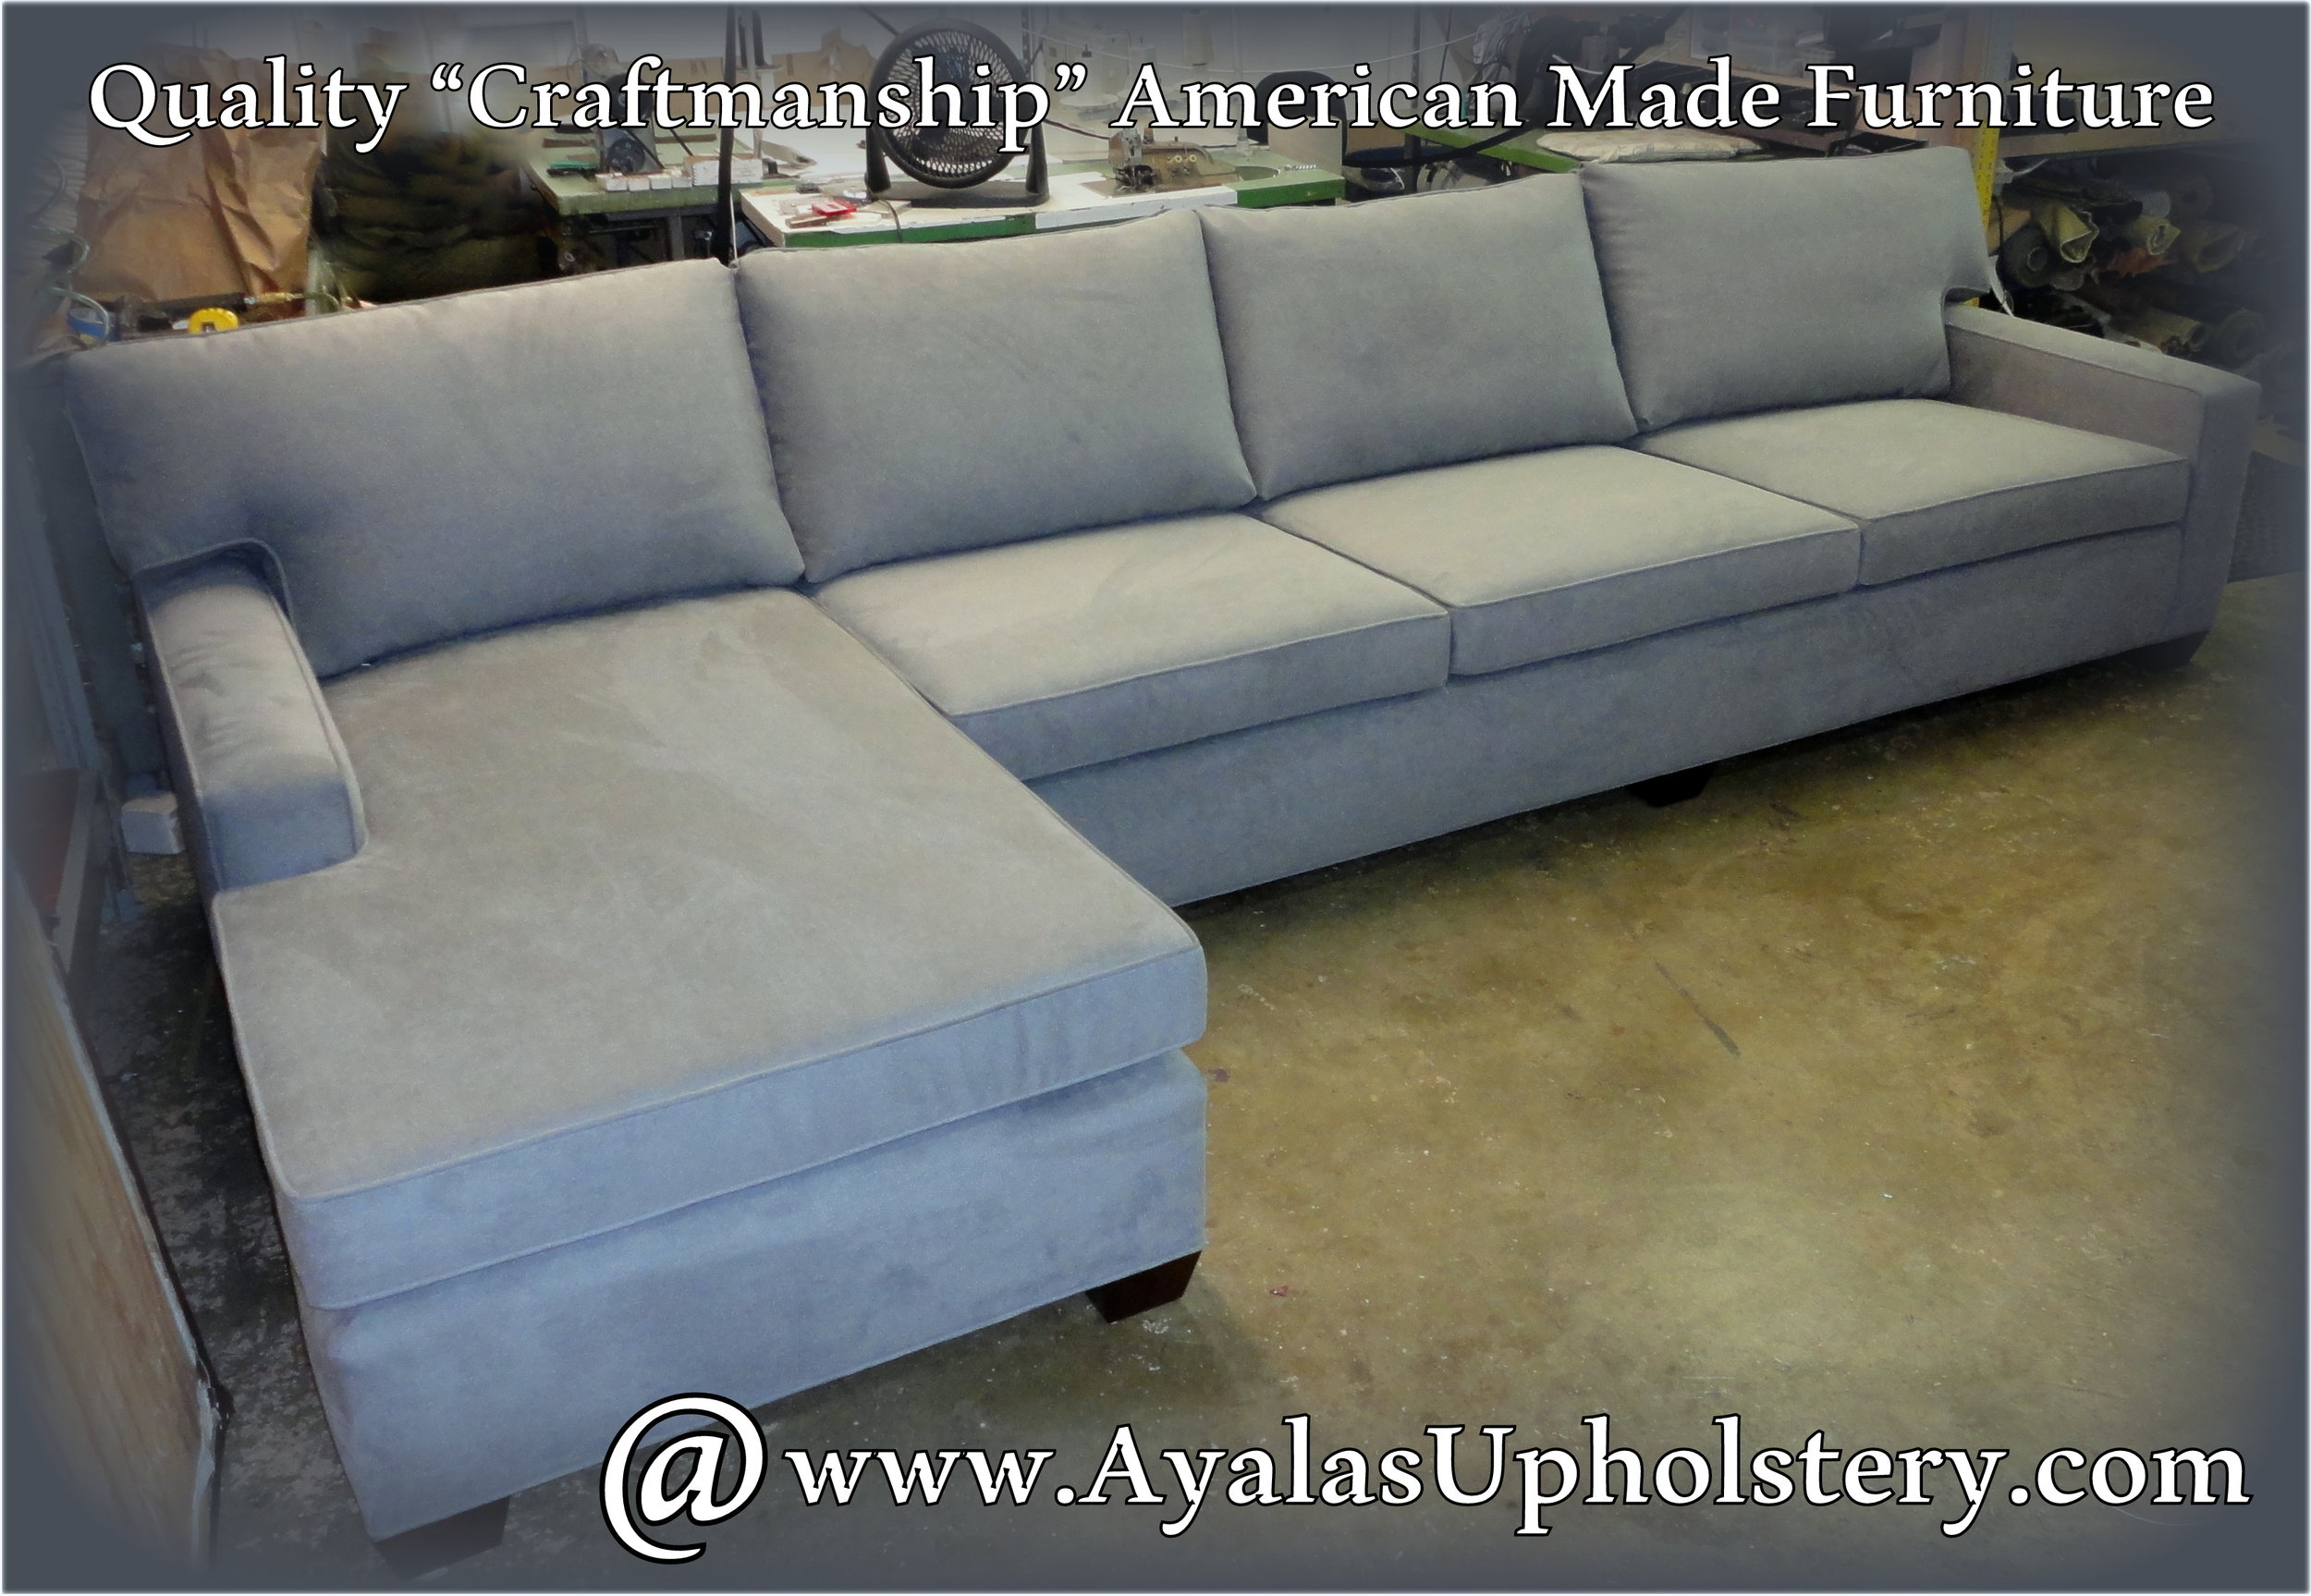 2 piece Sectional after  photo #005.jpg